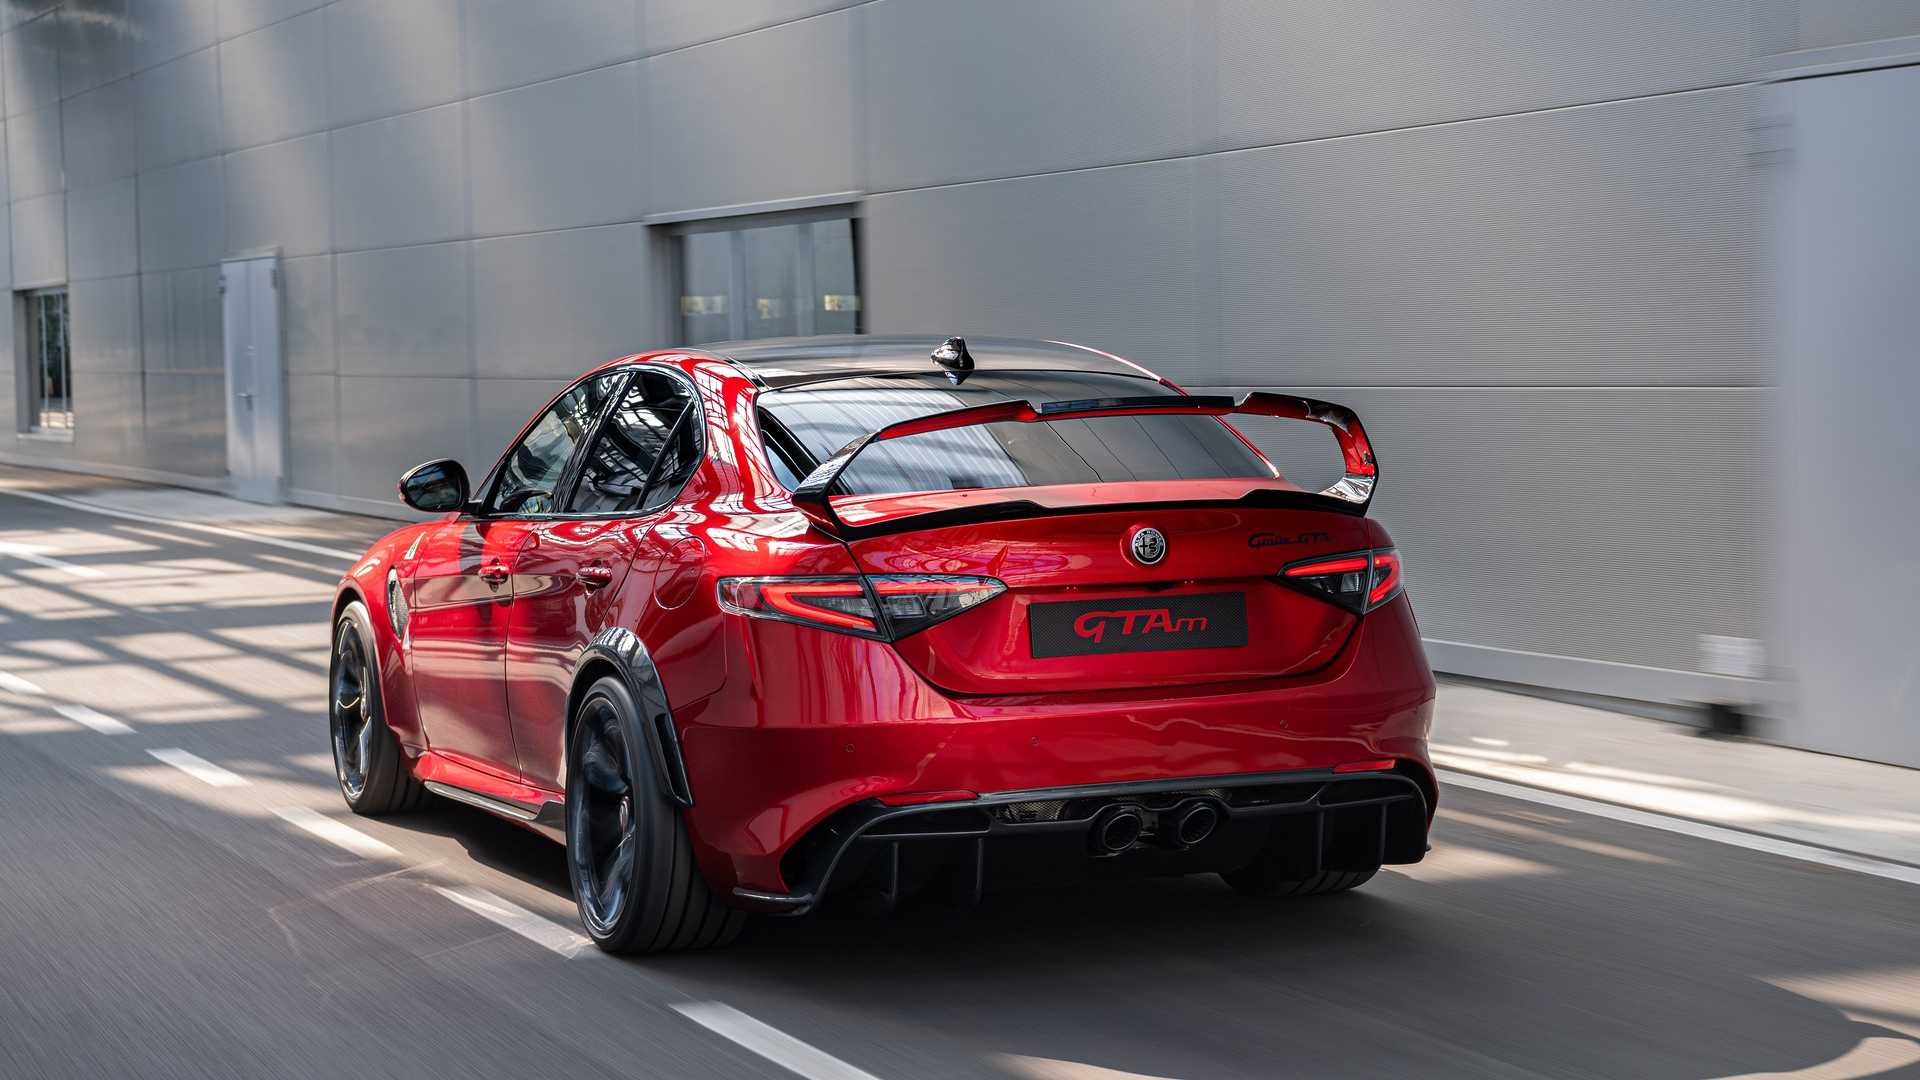 Rear view of the Giulia GTAm showing the new rear wing and diffuser.